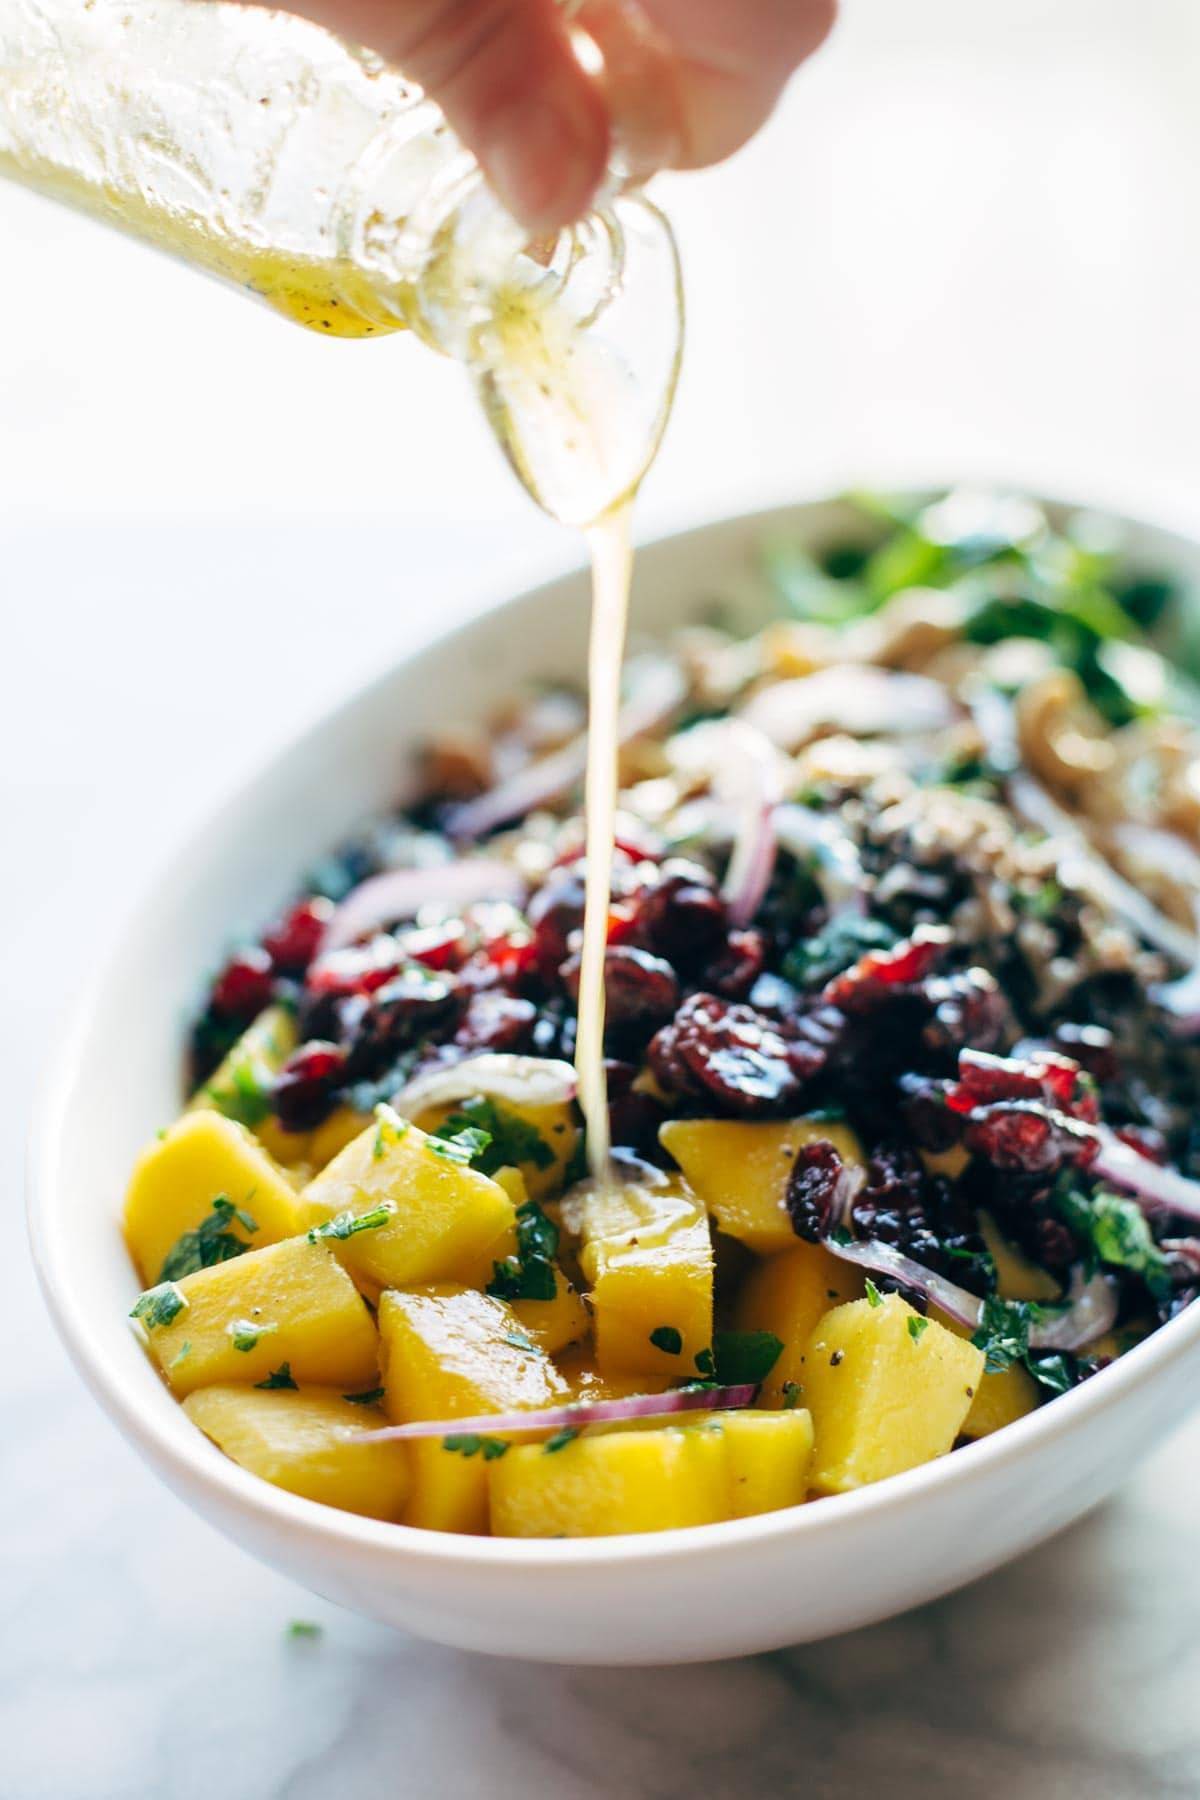 Easy Thanksgiving Salad - arugula, wild rice, cashews, dried cranberries, red onions, and a lemon dressing that shakes up easily in a jar. | pinchofyum.com